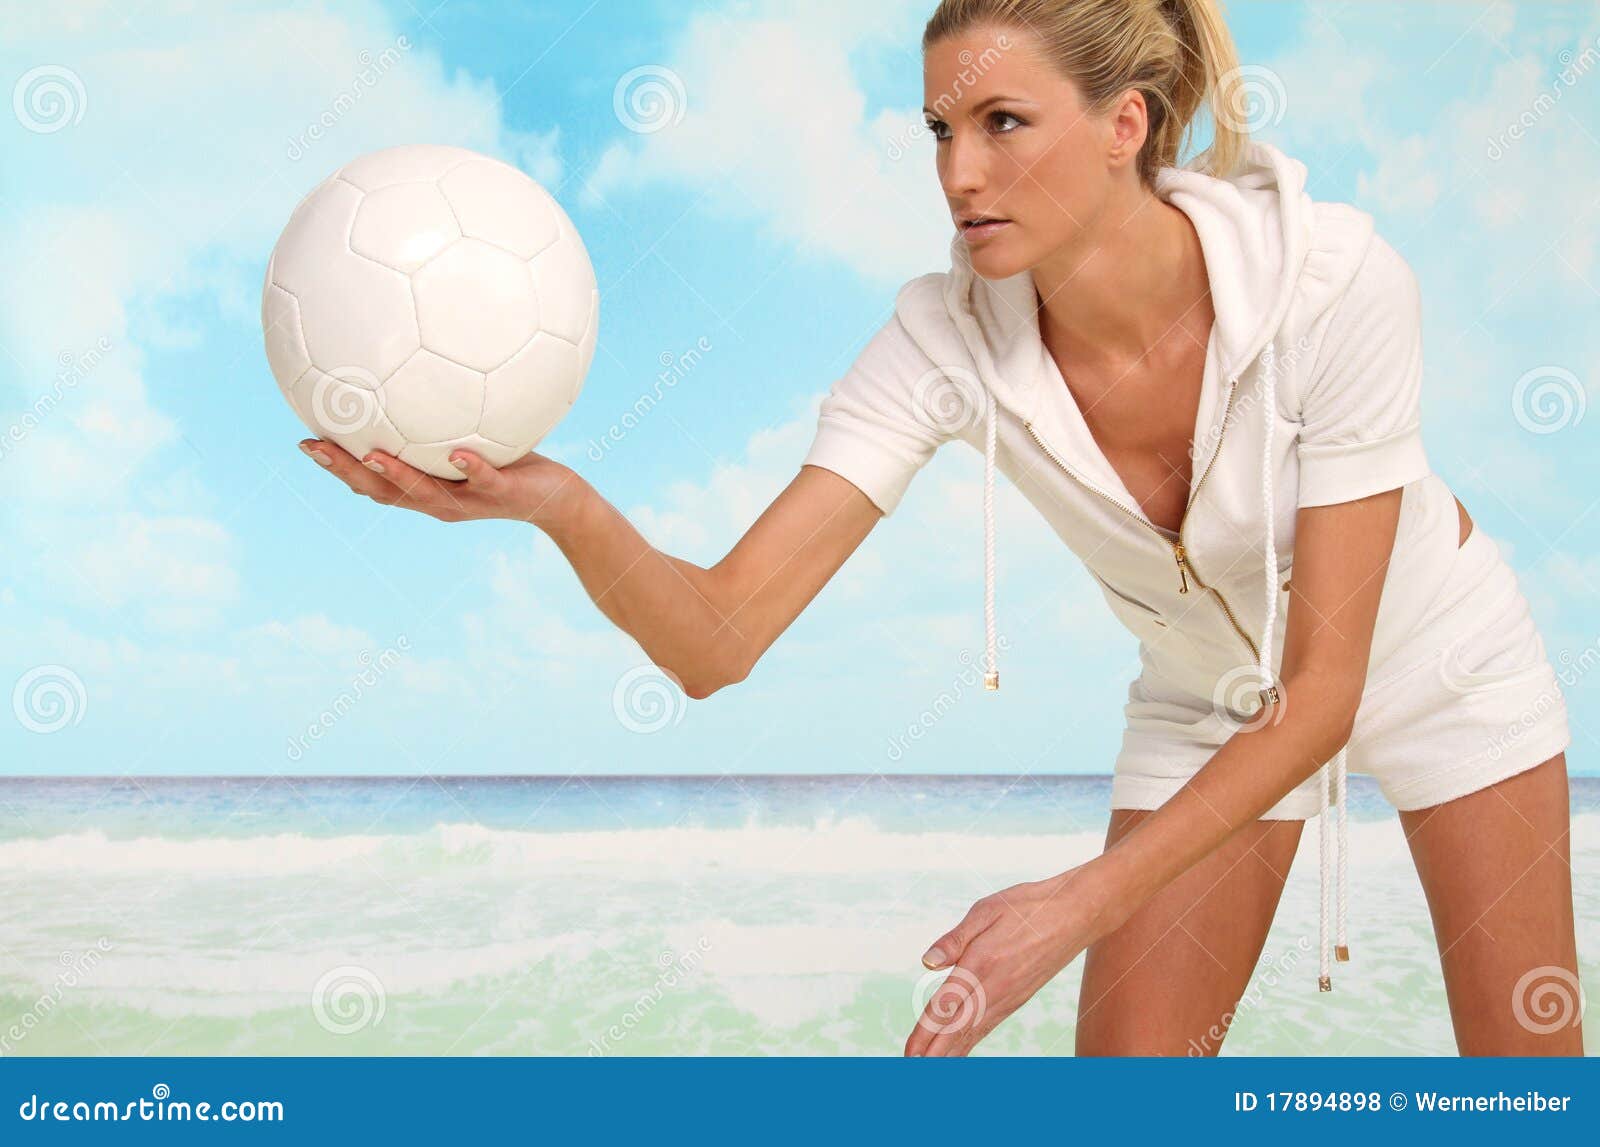 70+ Girls Volleyball Shorts Stock Photos, Pictures & Royalty-Free Images -  iStock